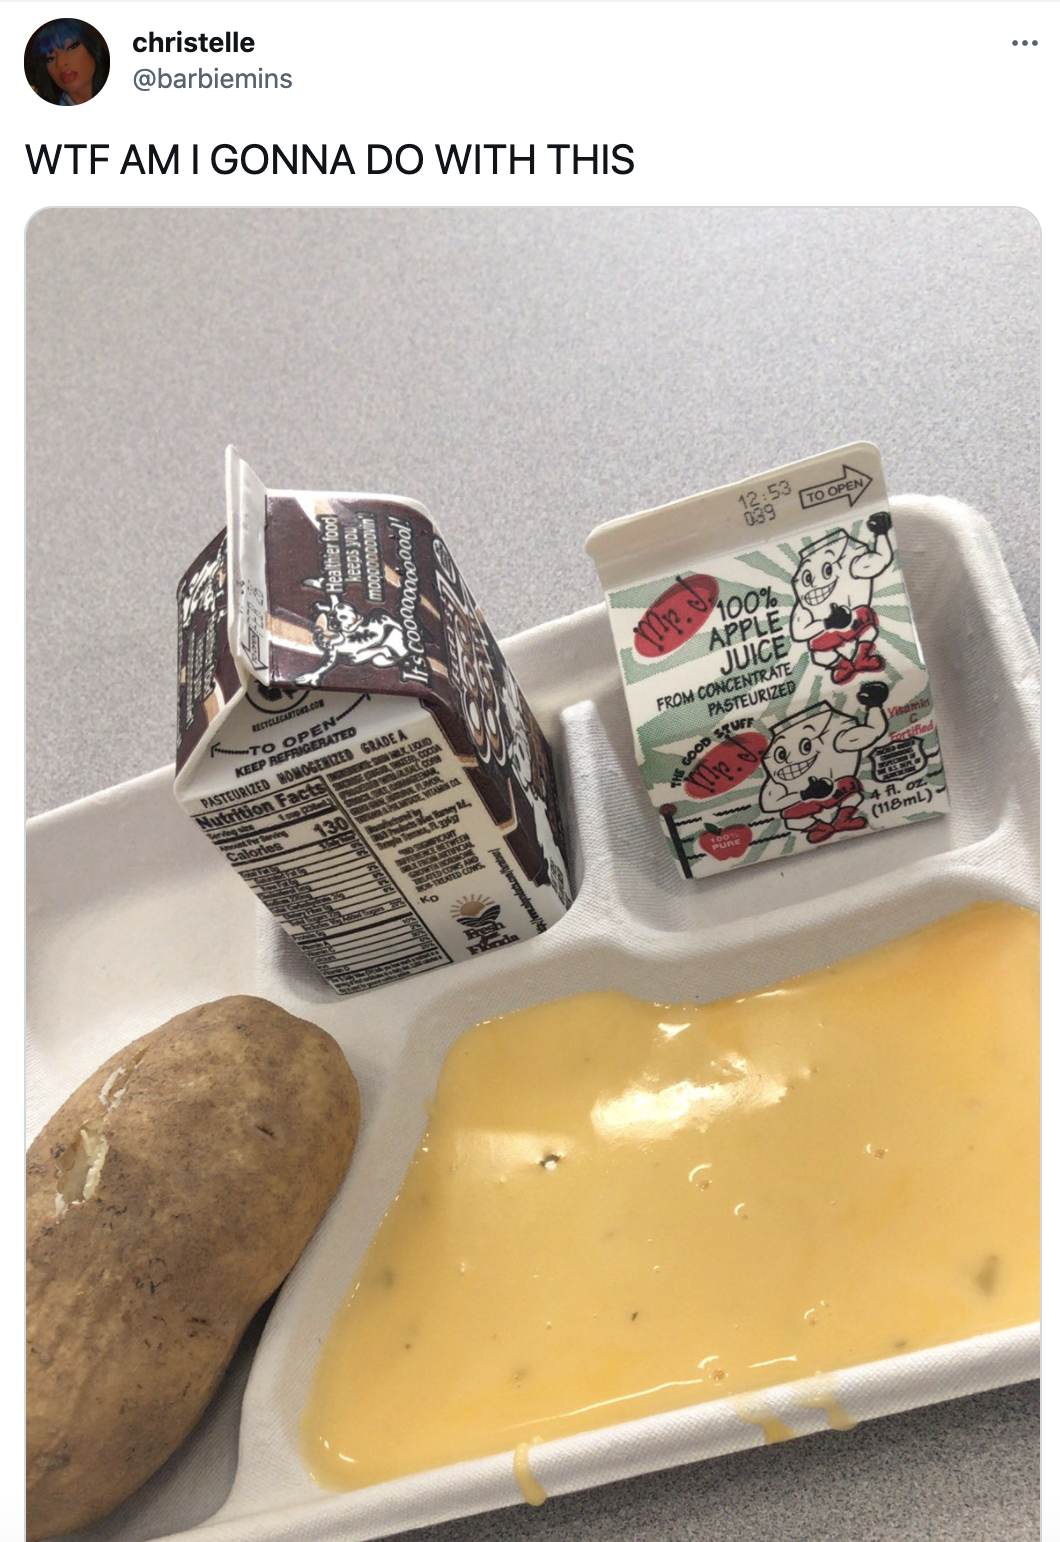 A school lunch on a tray, consisting of a small carton of chocolate milk, a smaller carton of apple juice, a baked potato, and yellowish gloop